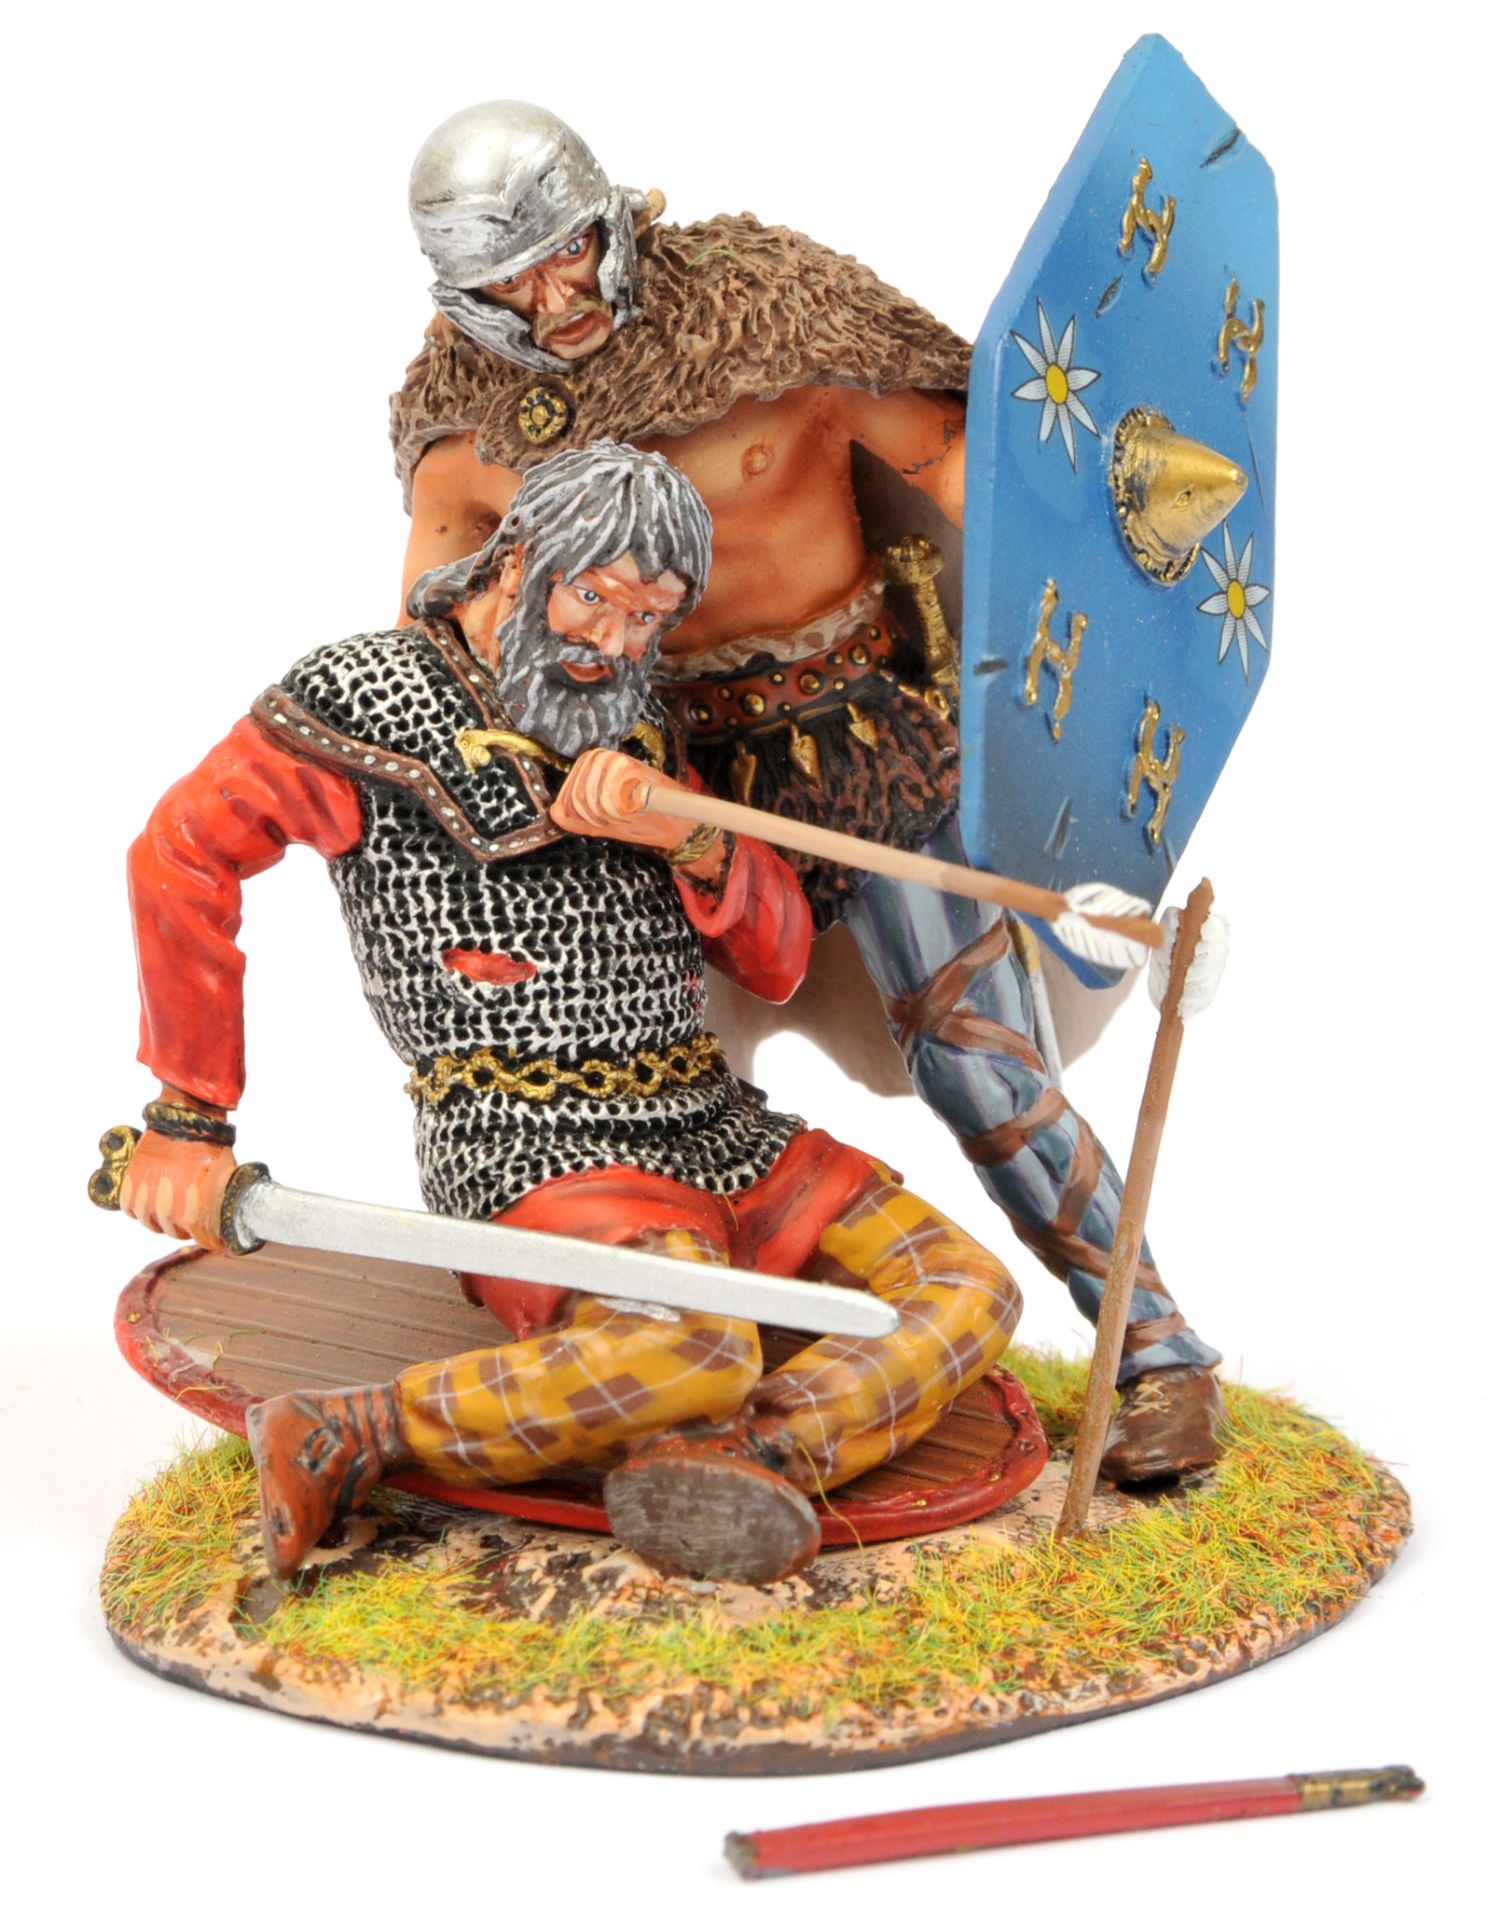 First Legion - 60mm Glory of Rome Series - Image 2 of 3